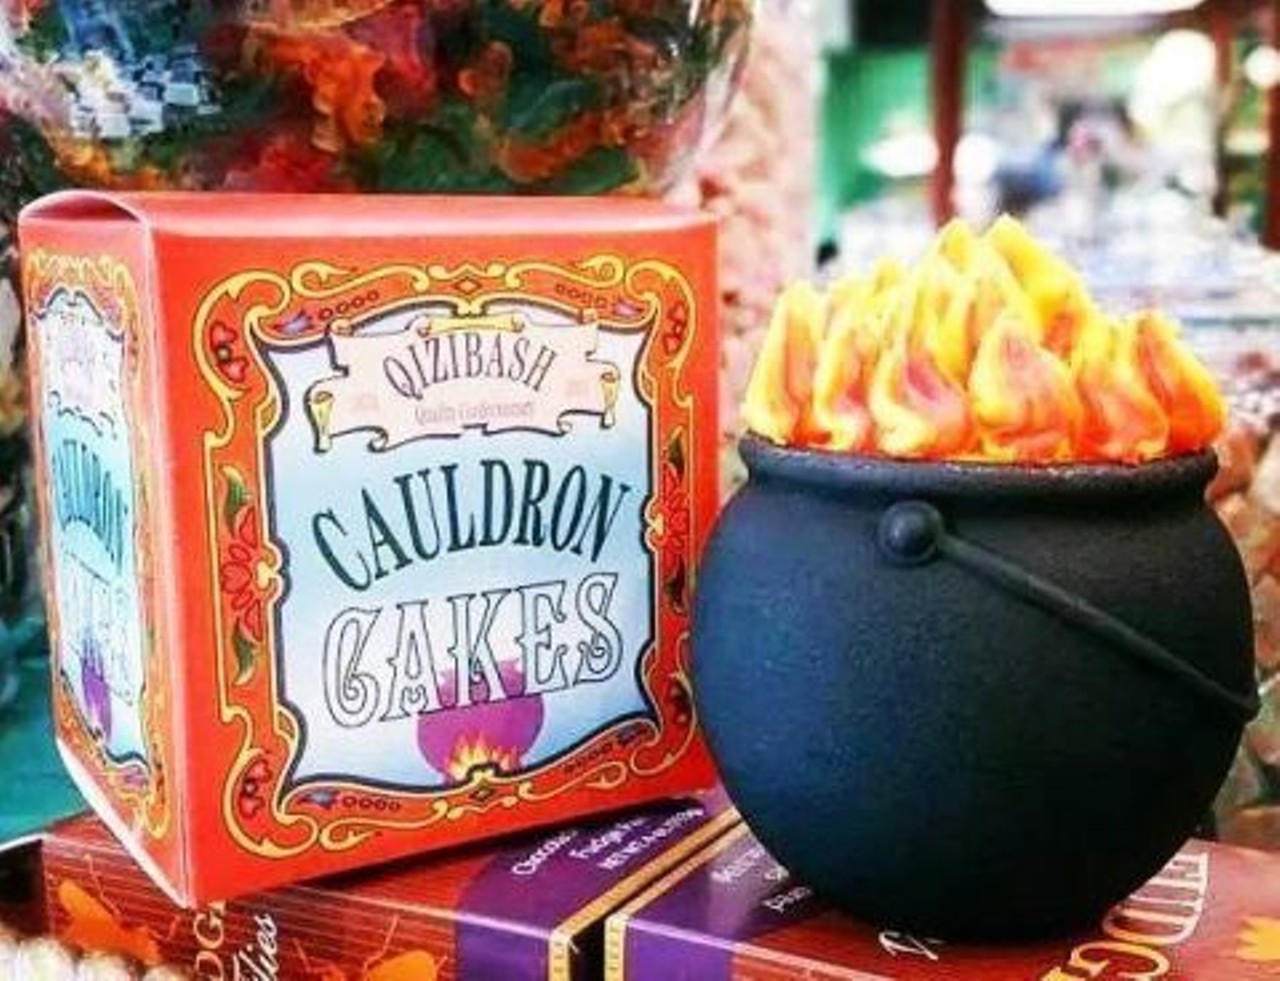 Cauldron Cakes 
Honeydukes, The Wizarding World of Harry Potter
This chocolate cake, topped with an orange and yellow buttercream flaming frosting, is served in a black reusable cauldron and was recently upgraded. The upgrade, which definitely made the cake tastier and added the cauldron, did drive the price up quite a bit though; from $3.95 to $9.95. The box even encourages those who bought the cake to make their own cauldron cake and reuse the cauldron itself. This moist cake can be found at Honeydukes and Sugarplum&#146;s.
Photo via Caldron Cakes/Delish